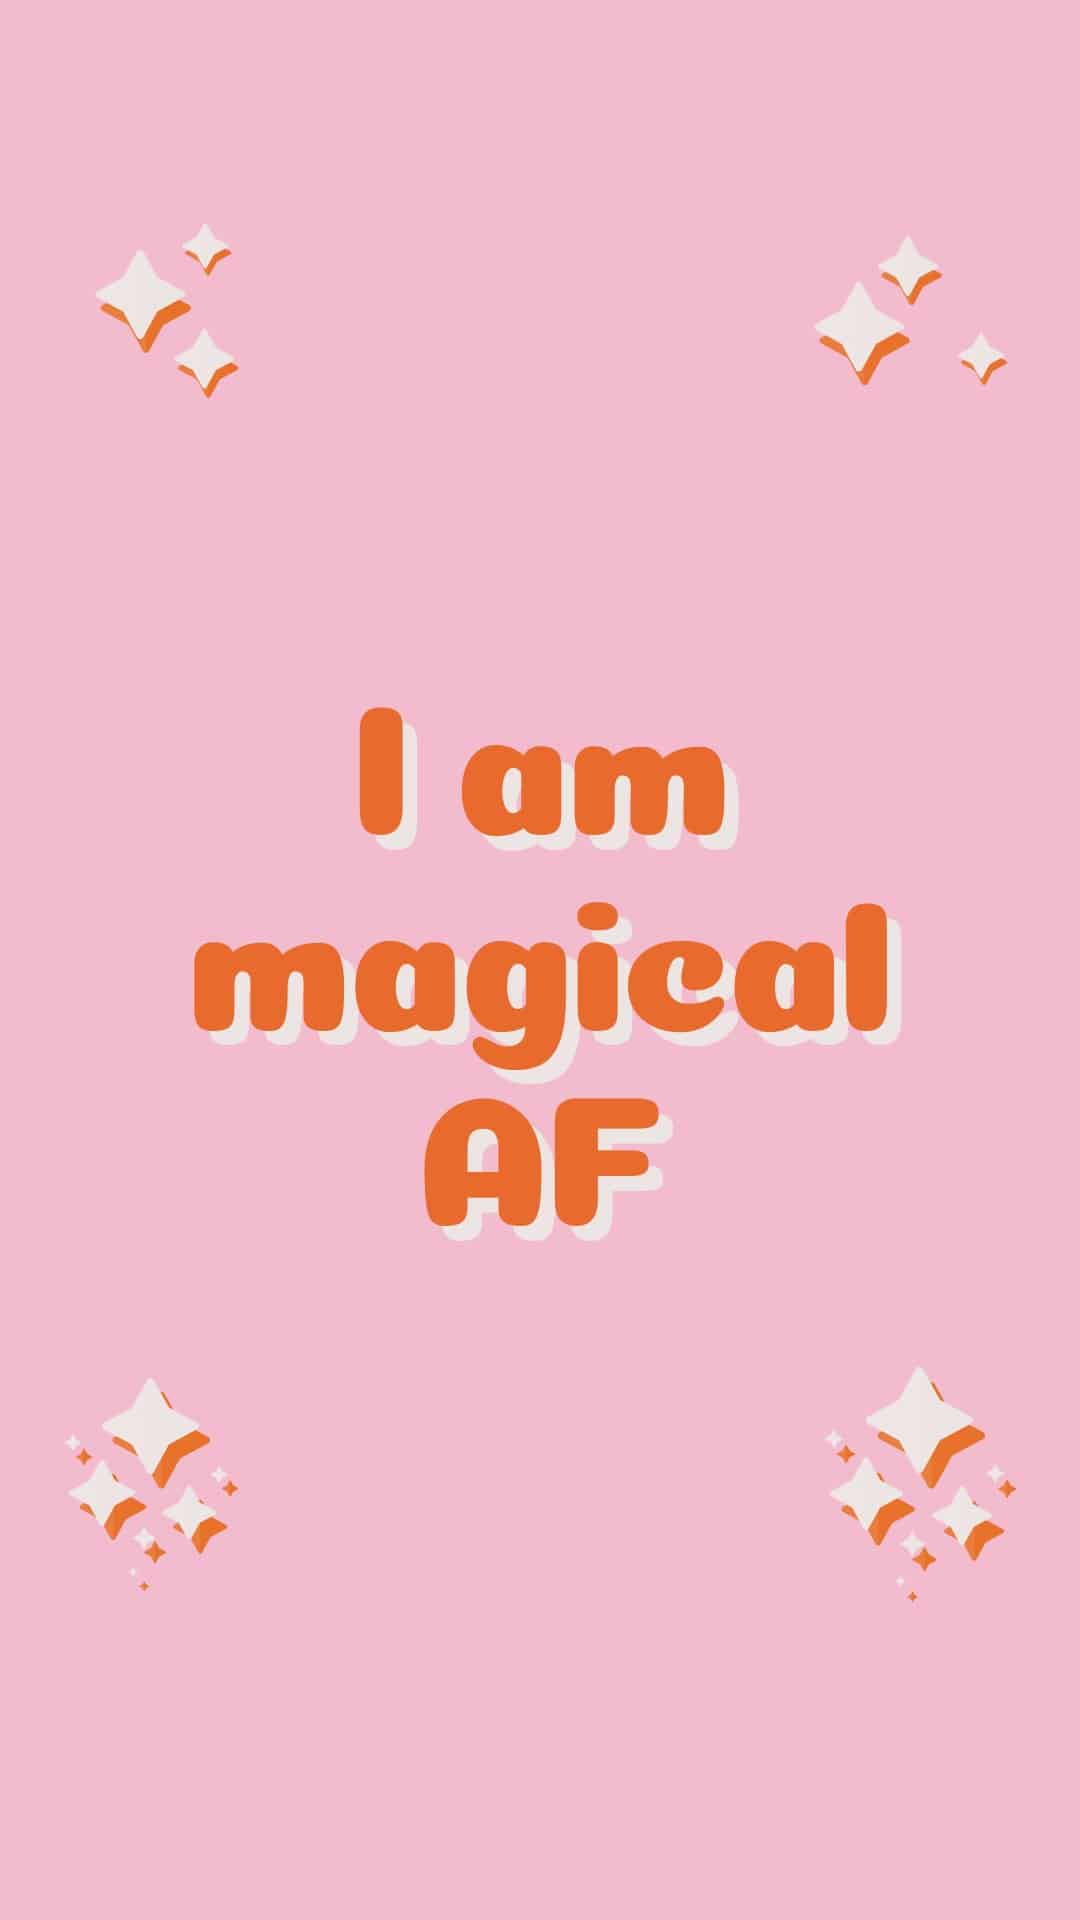 Positive Phone Wallpaper Affirmations For A Better You in 2020